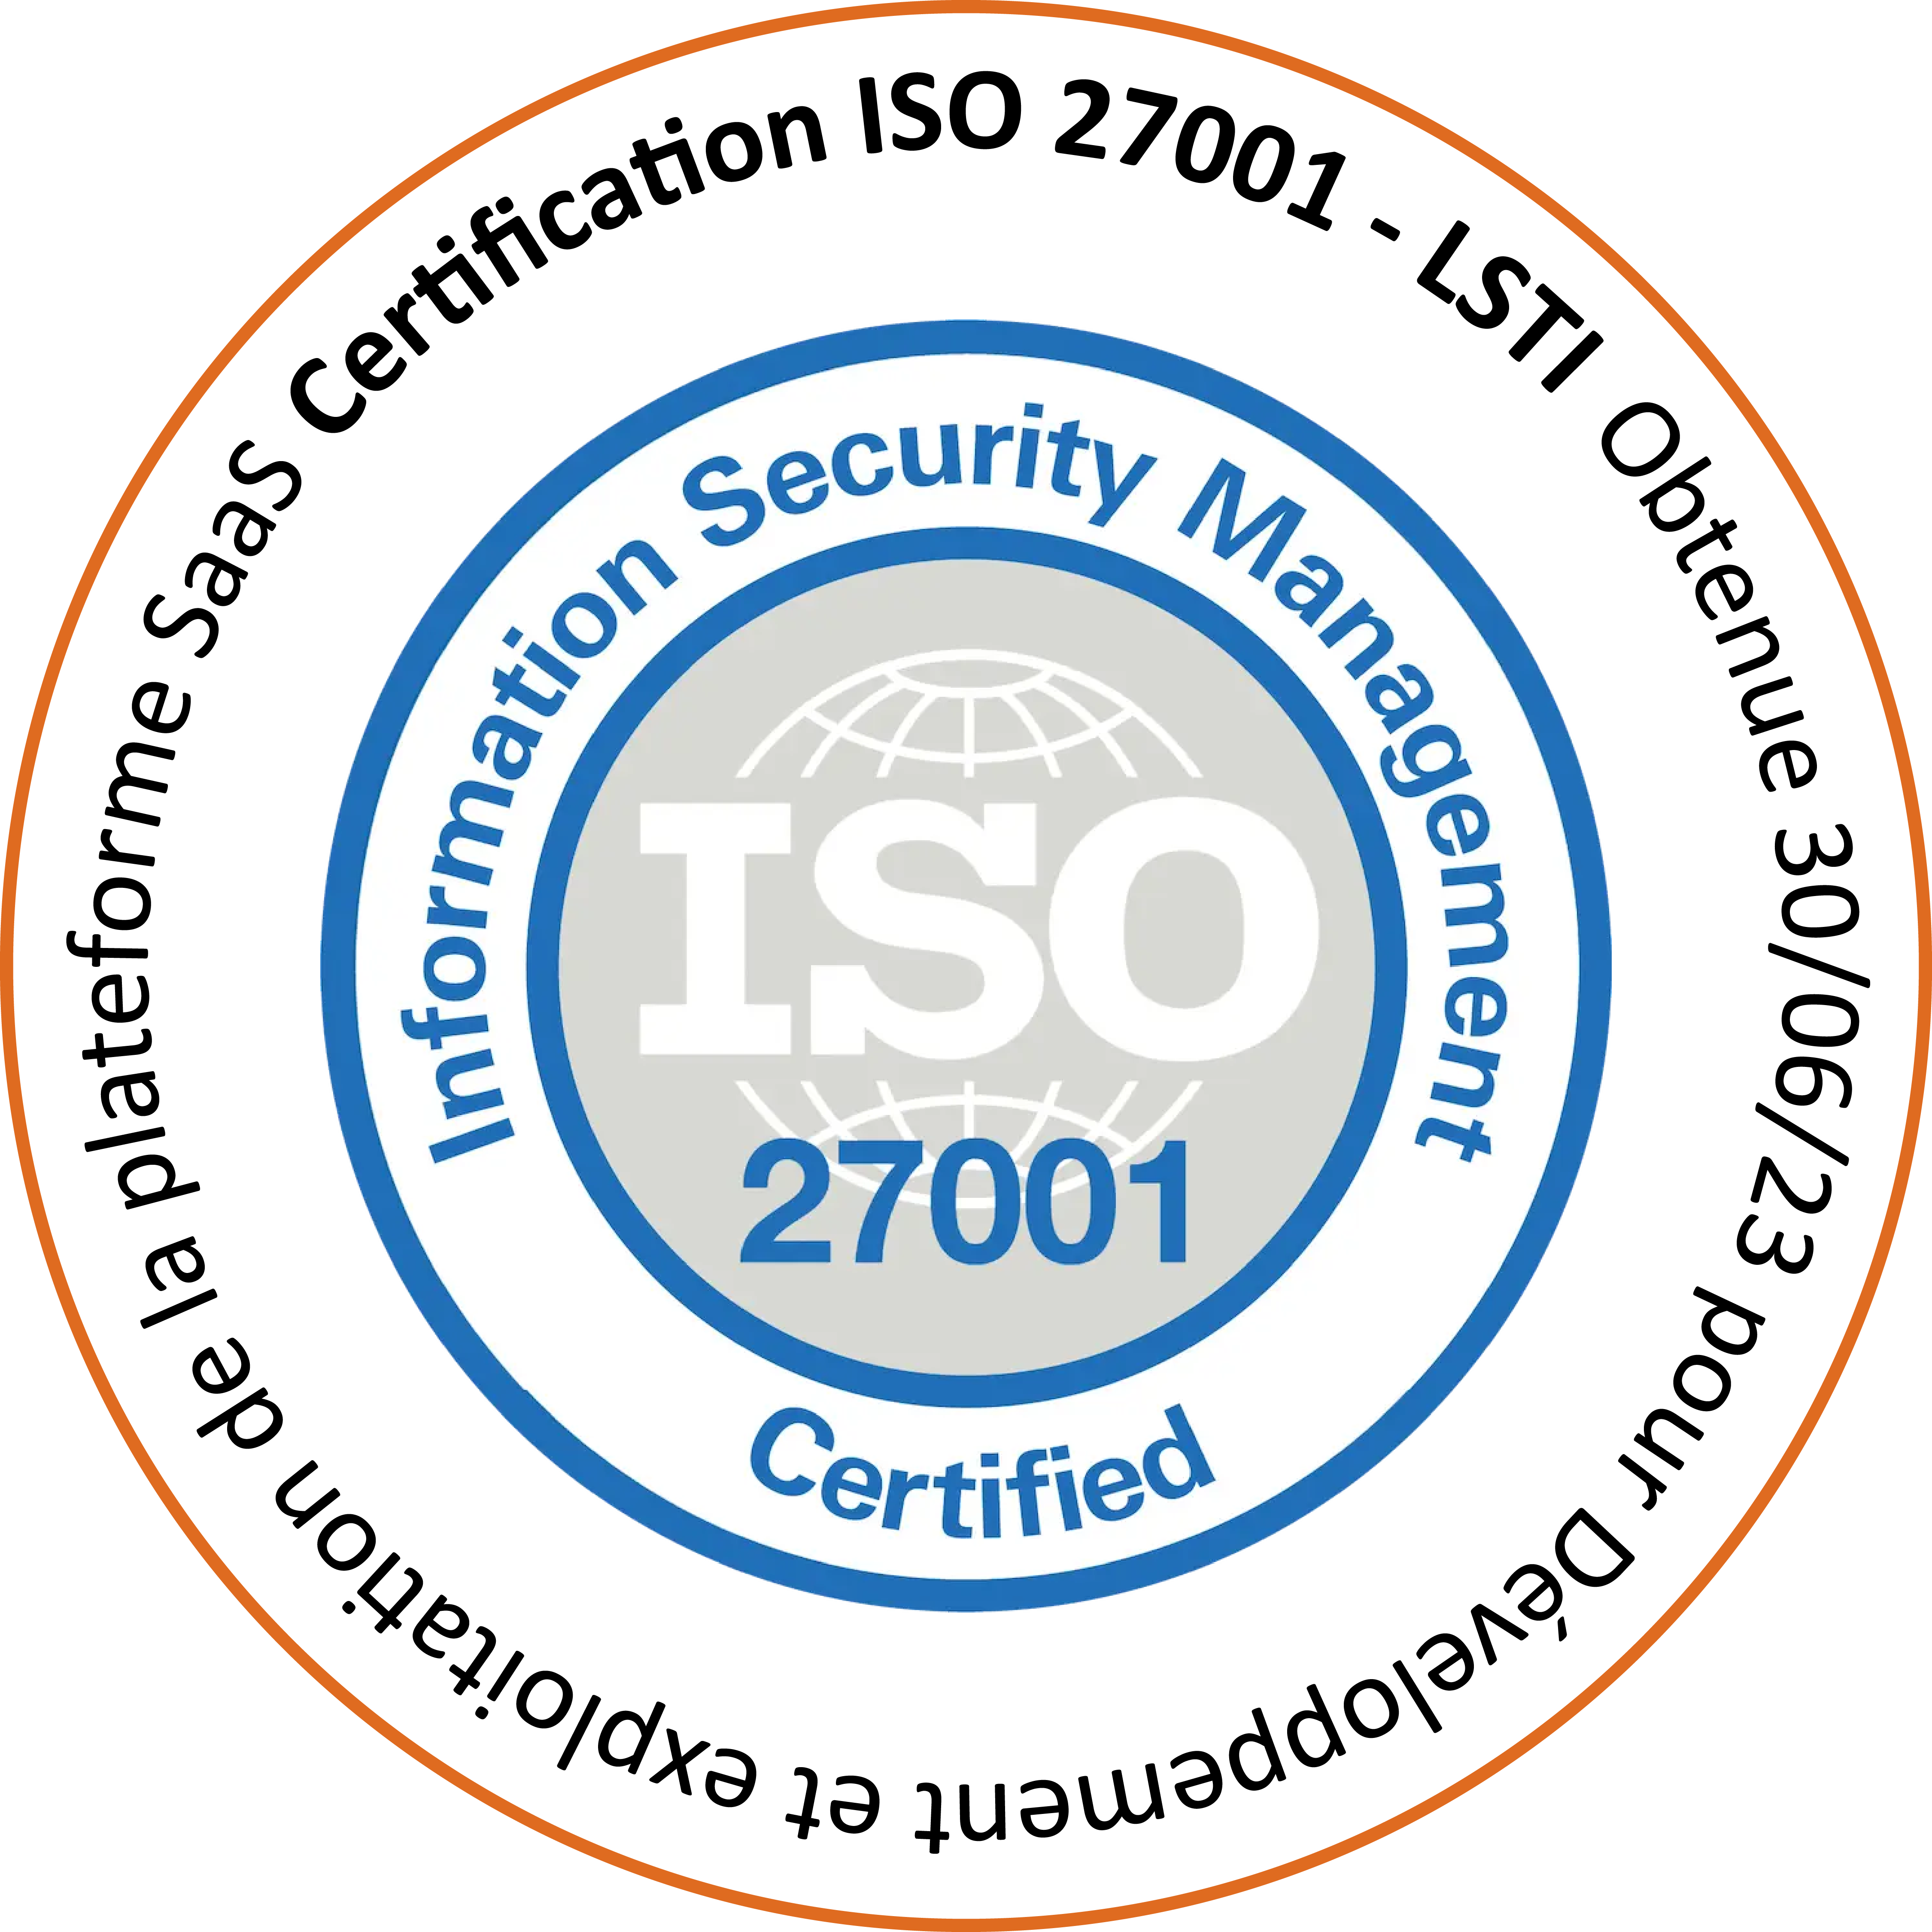 Image label iso27001